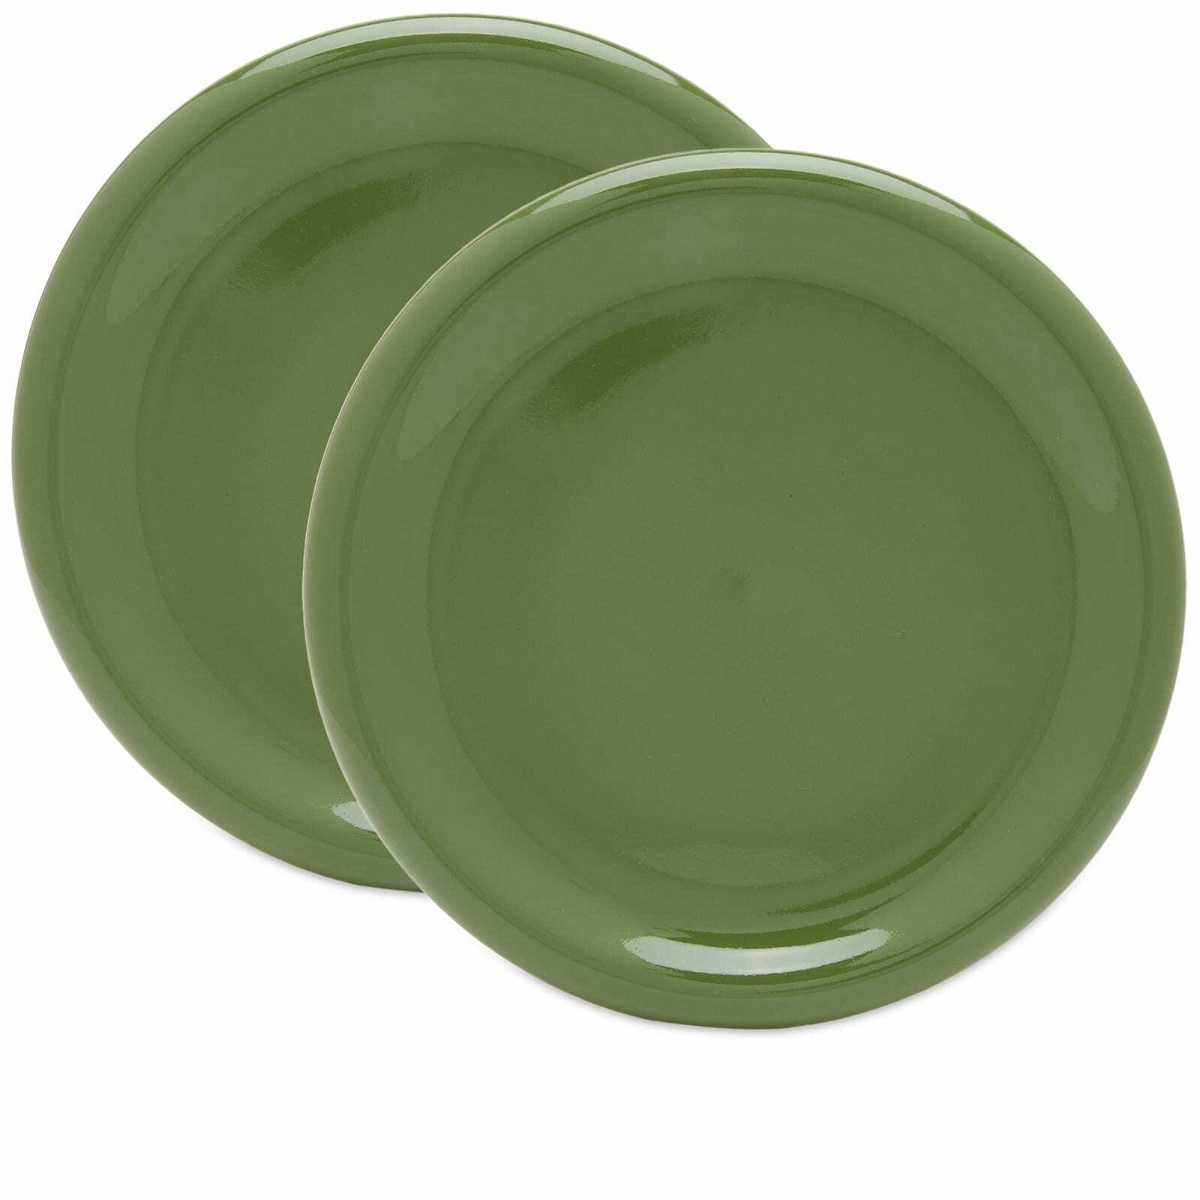 Photo: HAY Barro Dinner Plate - Set of 2 in Green